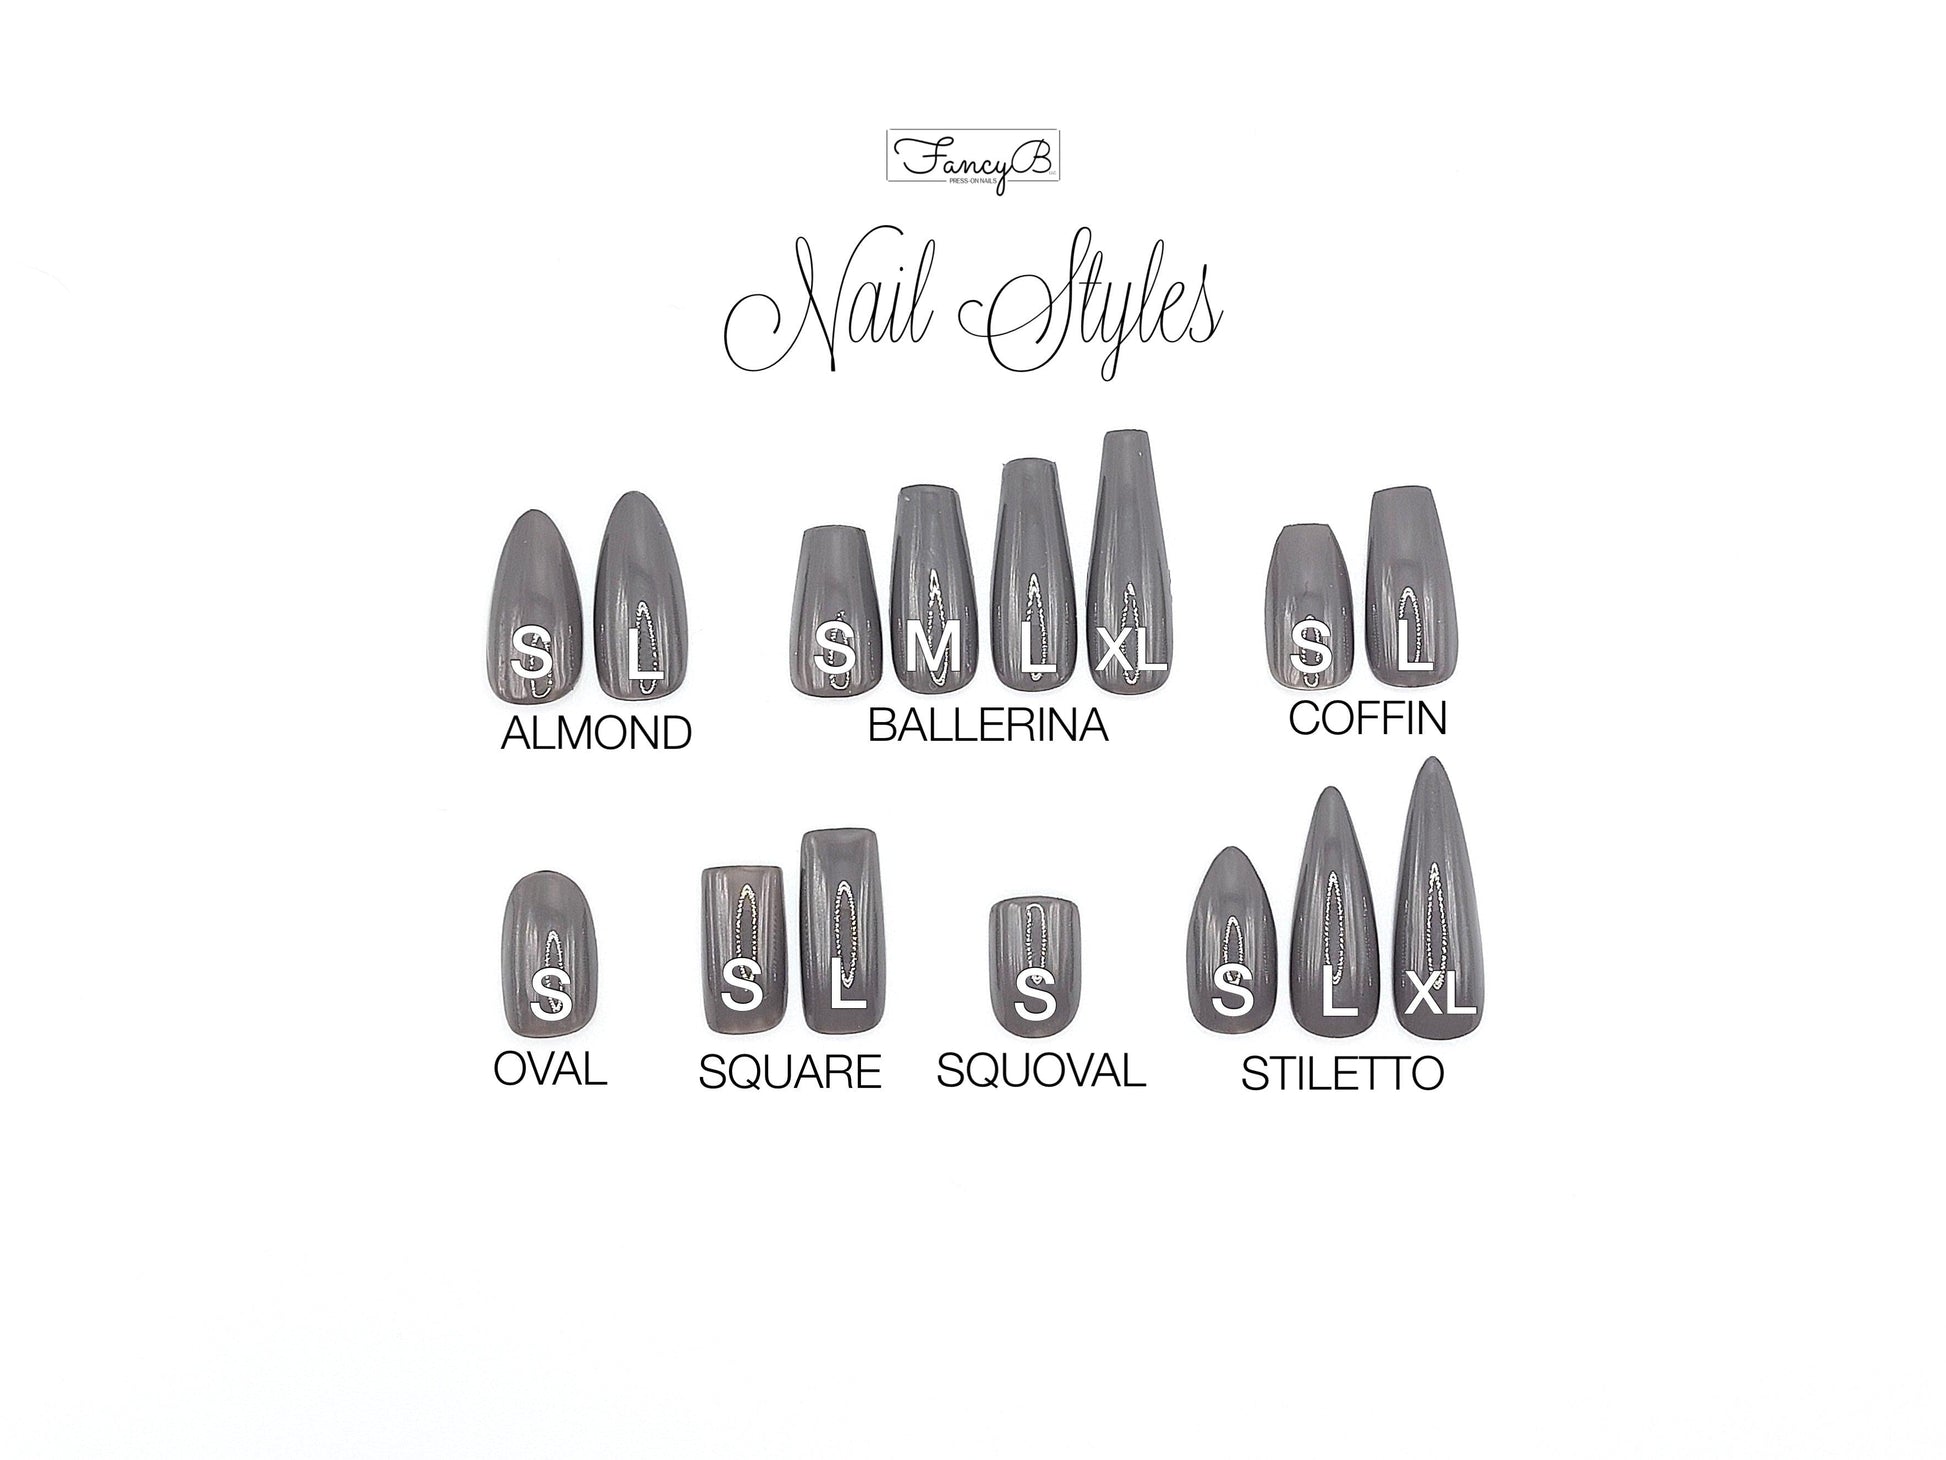 Zen Collection: Just Breathe - FancyB Press-on Nails